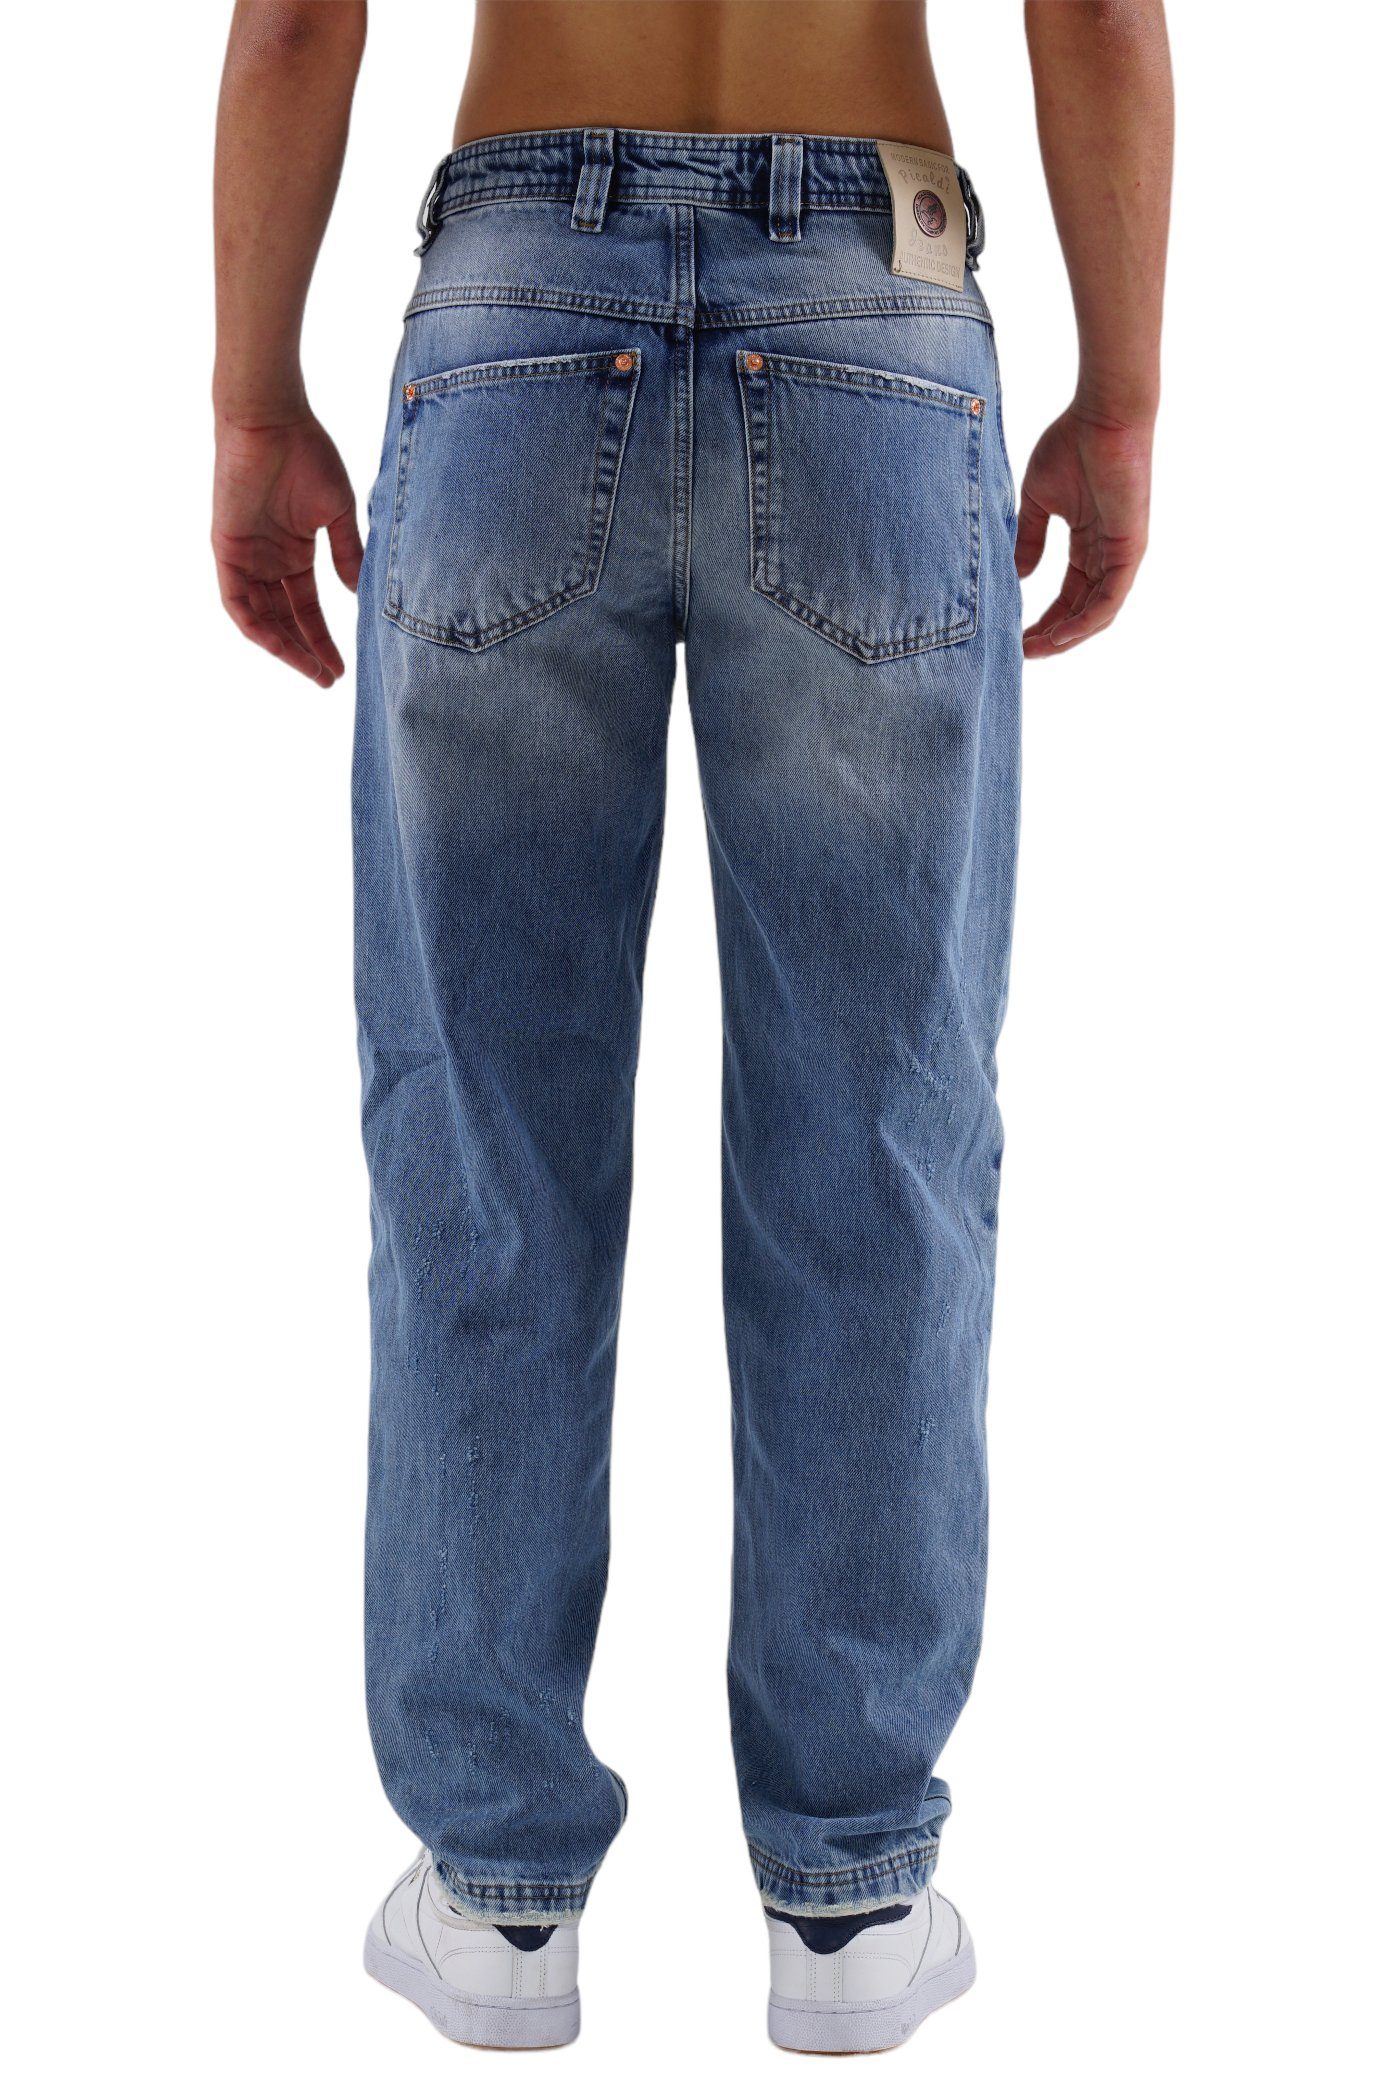 PICALDI Jeans Weite Jeans Fit, Zicco 472 Oakland Relaxed Loose Fit